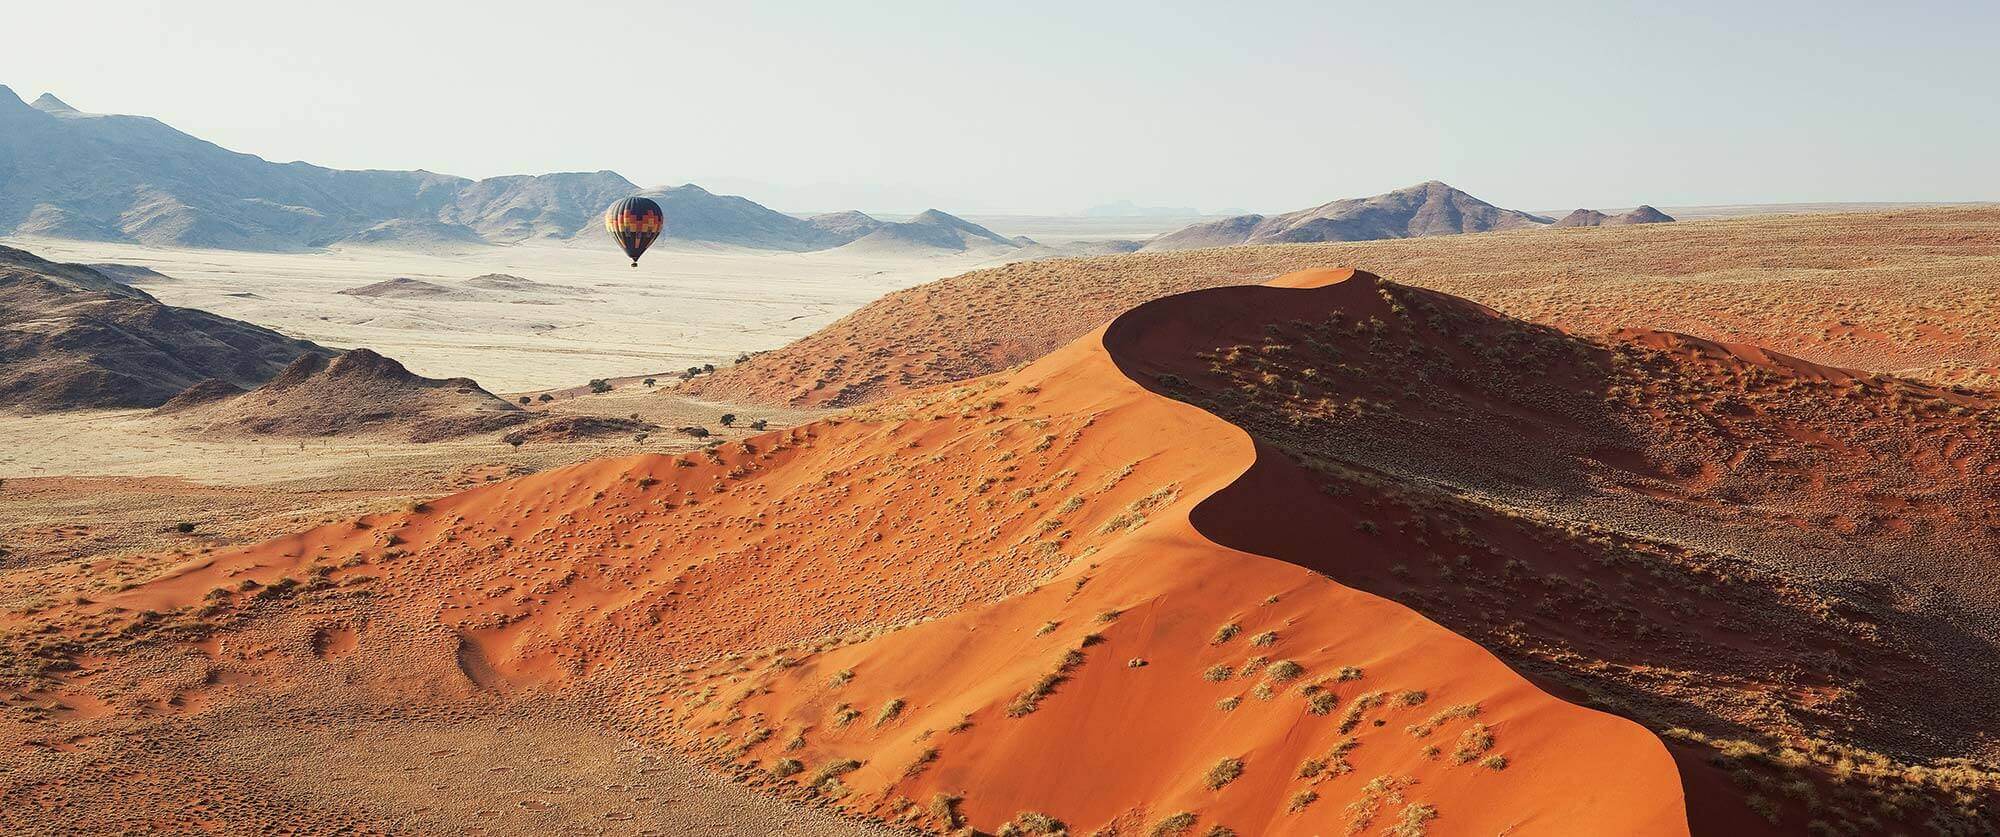 Hot air balloon over the Sossusvlei dunes in Namibia